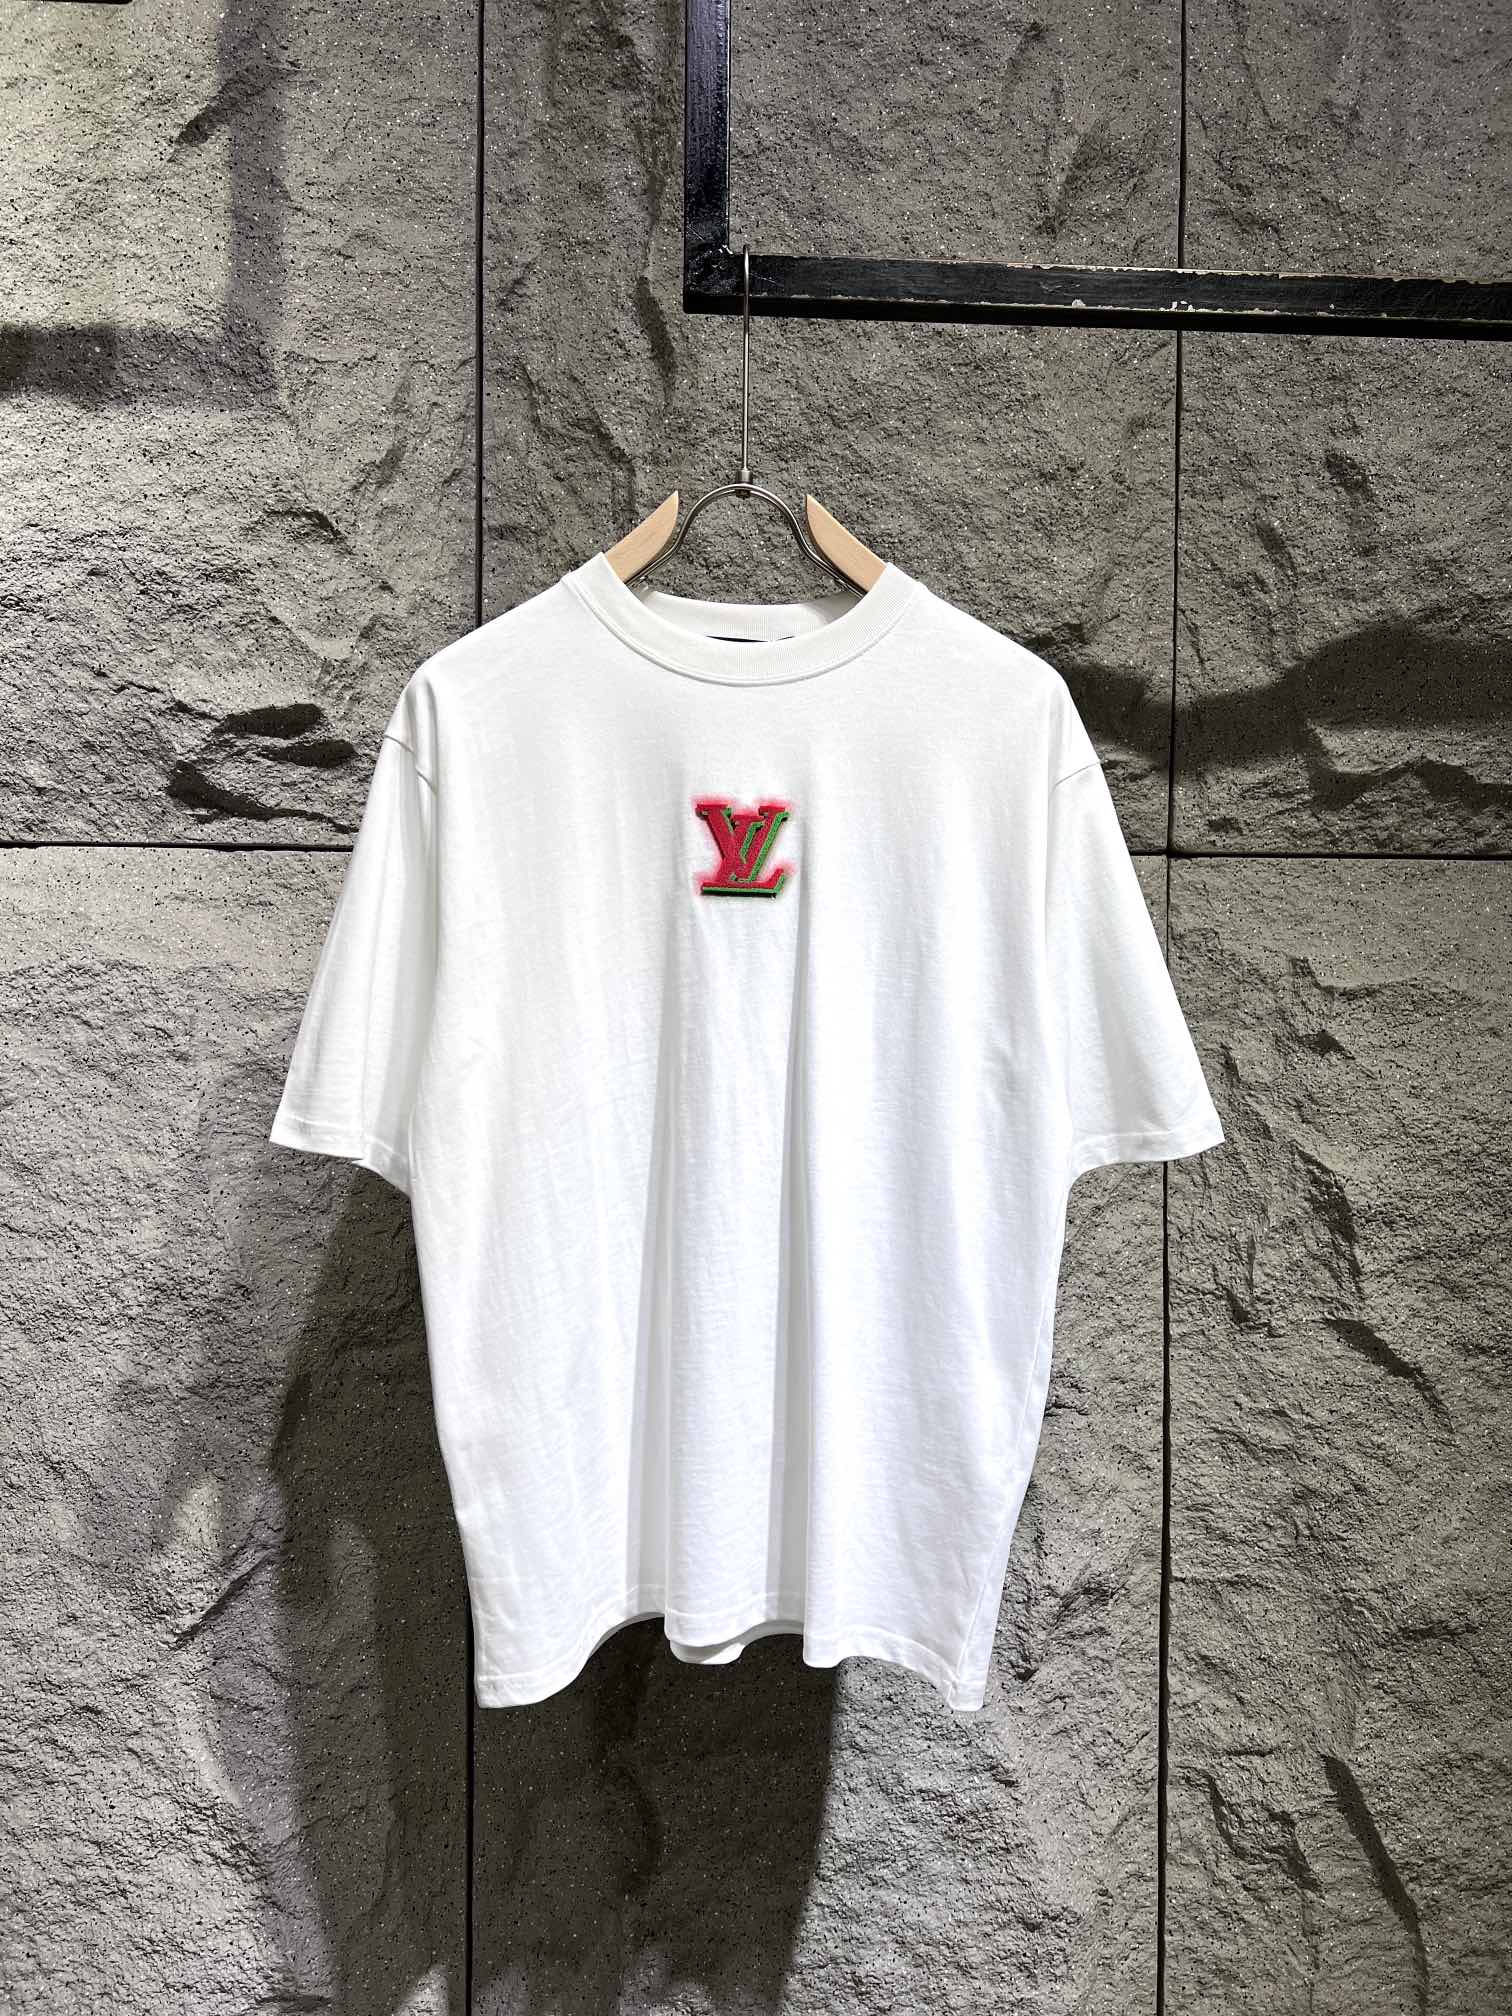 Buy Best High-Quality
 Louis Vuitton Clothing T-Shirt Black Doodle White Printing Unisex Cotton Knitting Short Sleeve